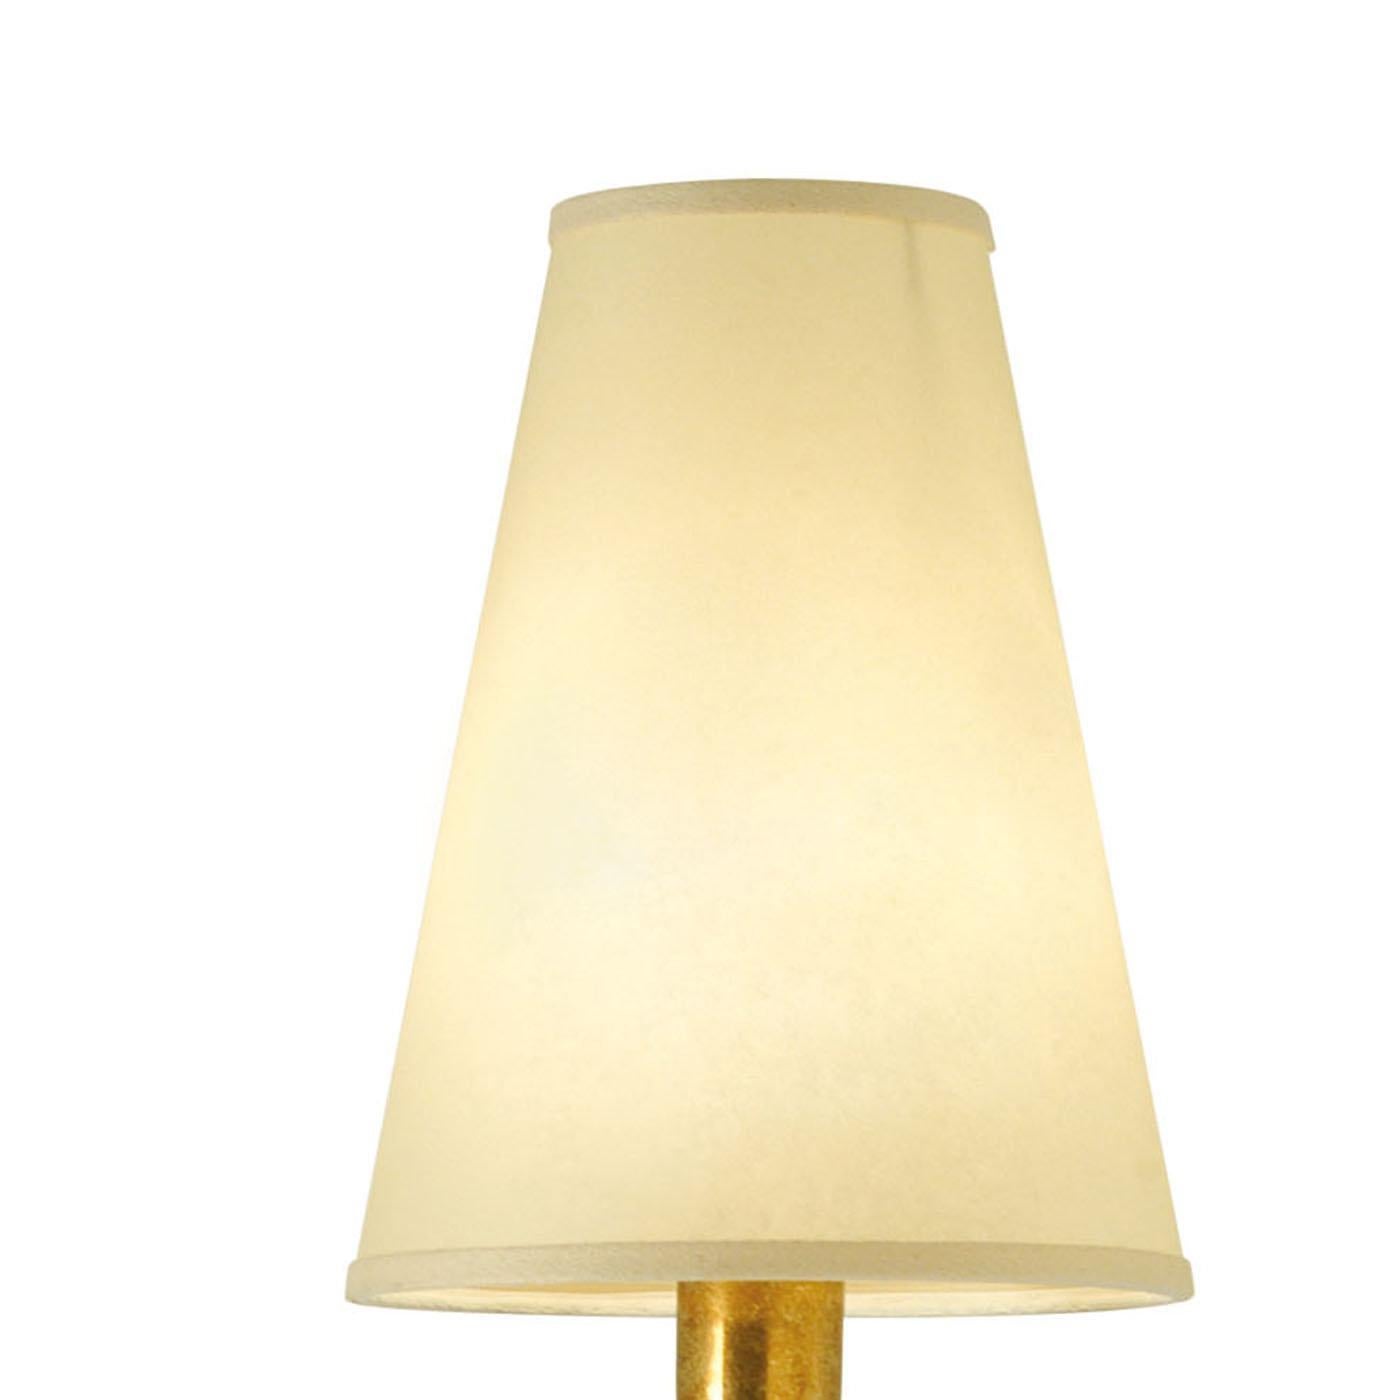 This elegant sconce features warm colors and classic charm. It is comprised of a round brass structure attached to the wall that supports a metal shaft finished with a characteristic rust color. The brass is present also here in round and